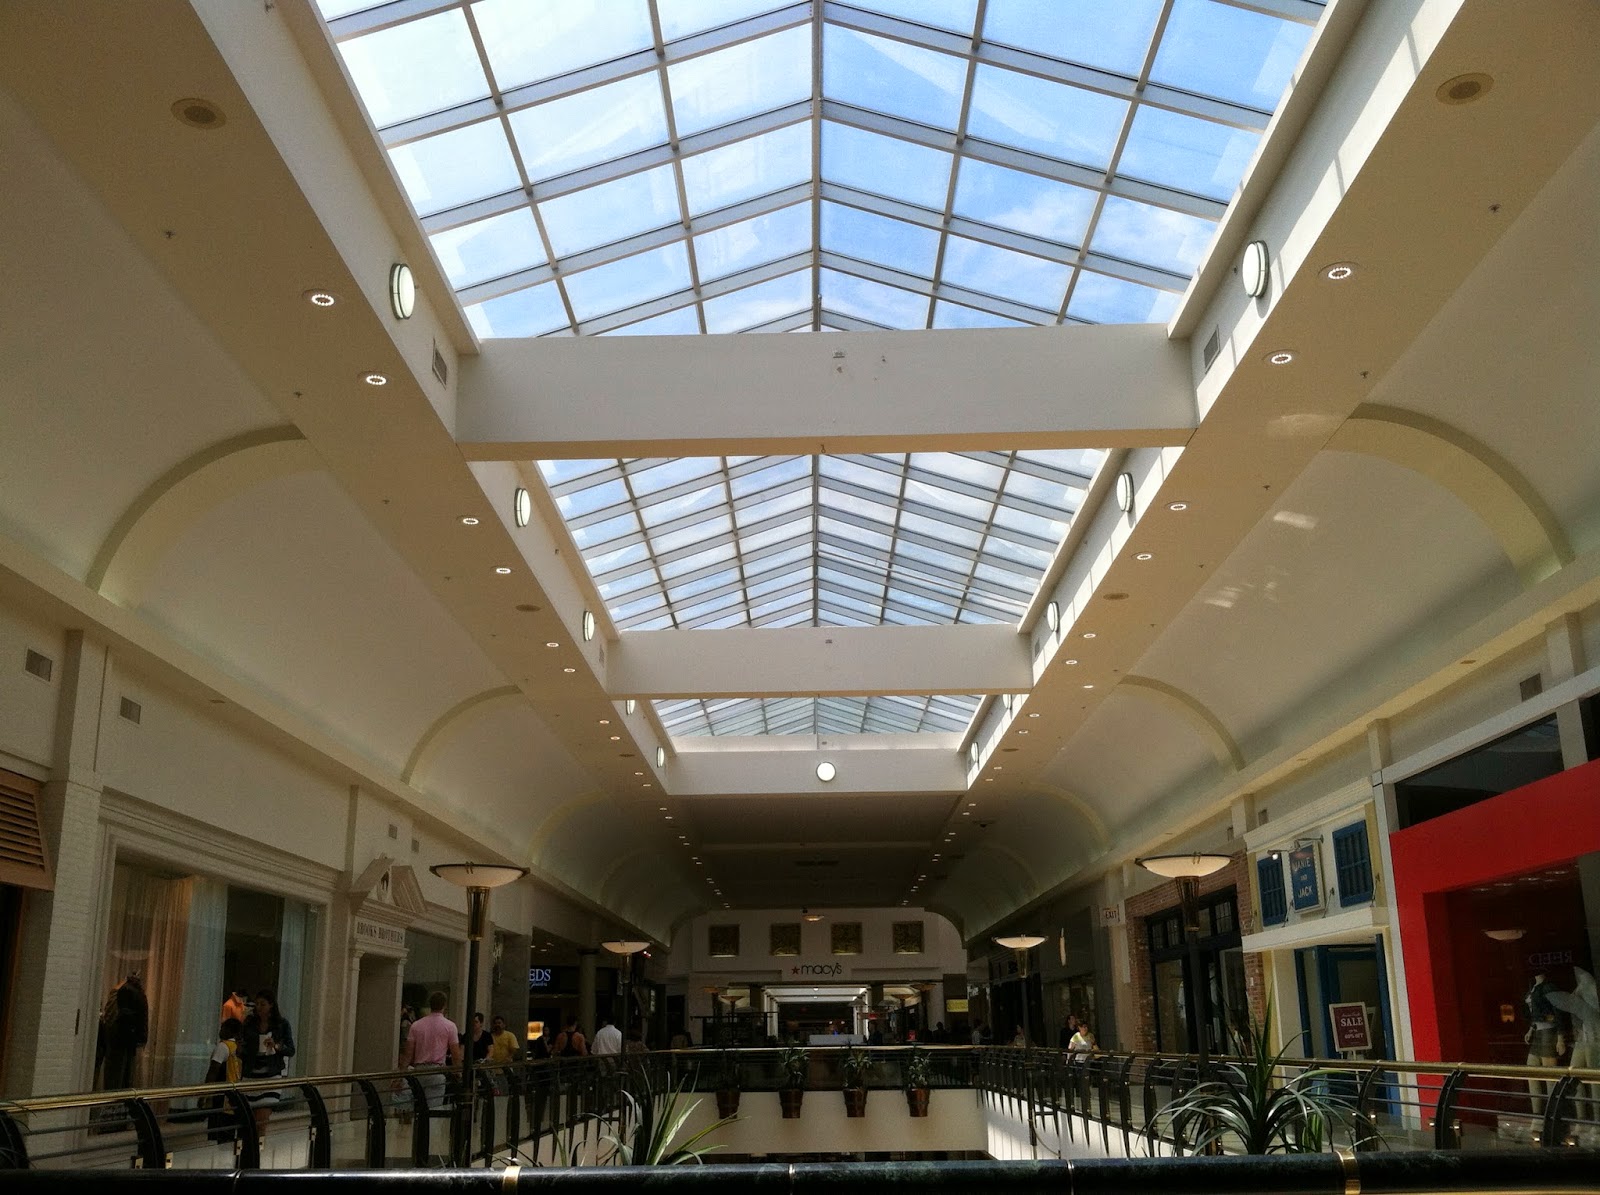 Thomasina's Words: Picture Tour Of Crabtree Valley Mall - Raleigh North